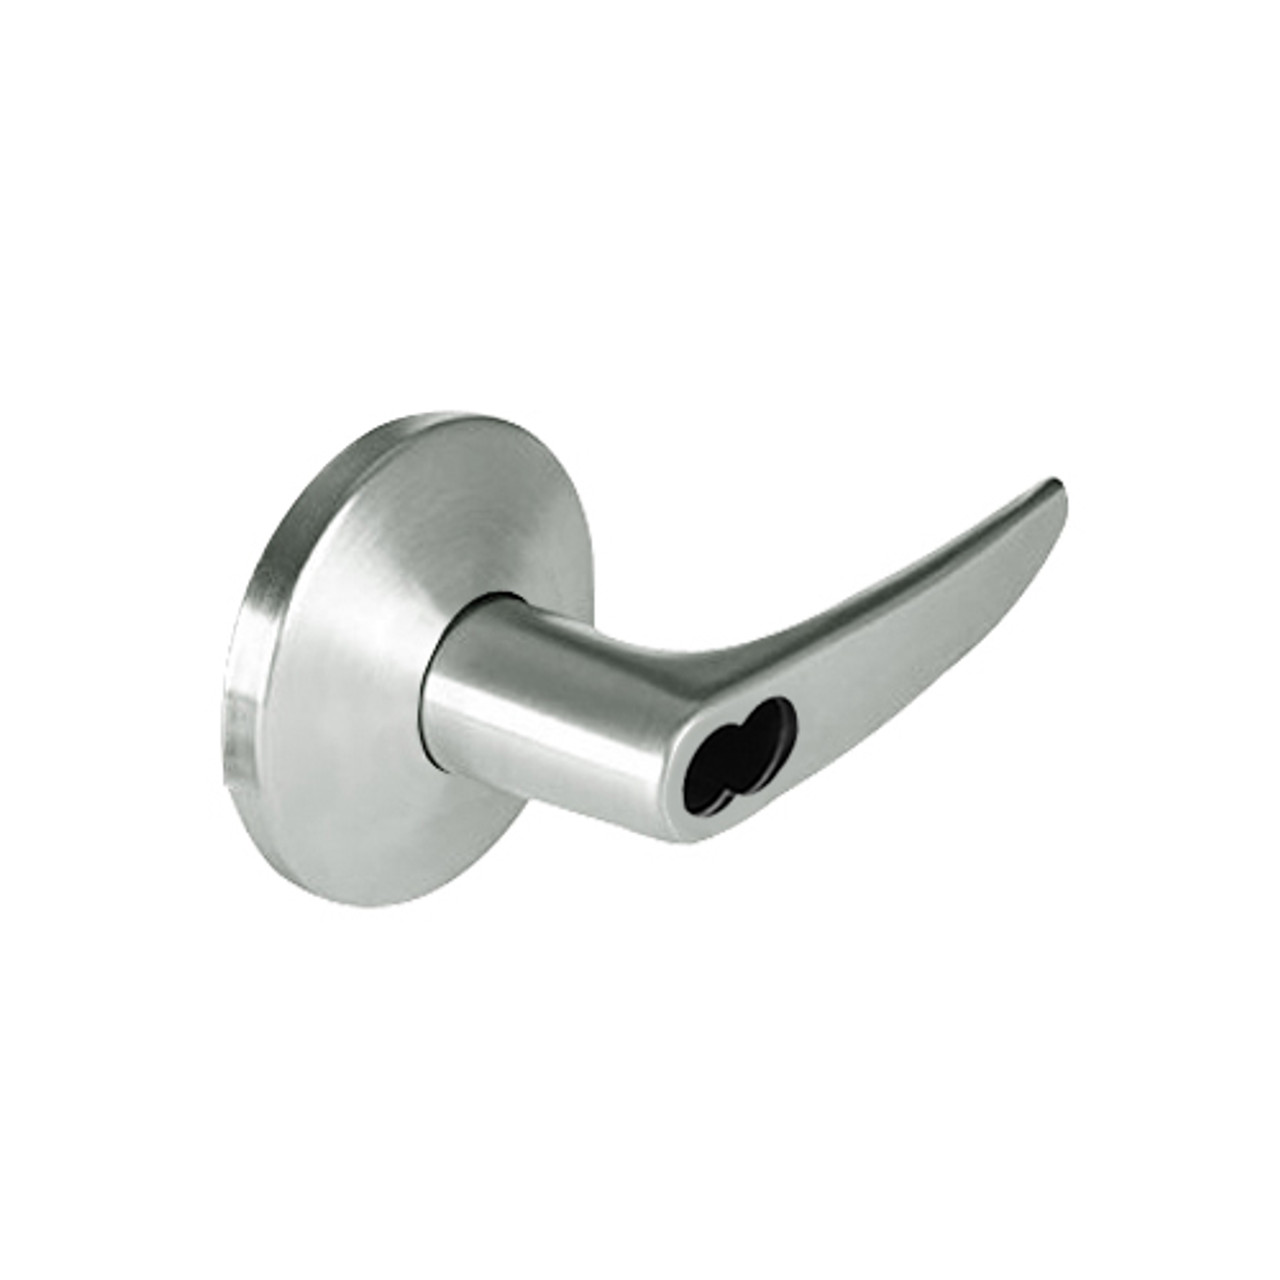 9K37YR16LSTK618 Best 9K Series Special Function Cylindrical Lever Locks with Curved without Return Lever Design Accept 7 Pin Best Core in Bright Nickel